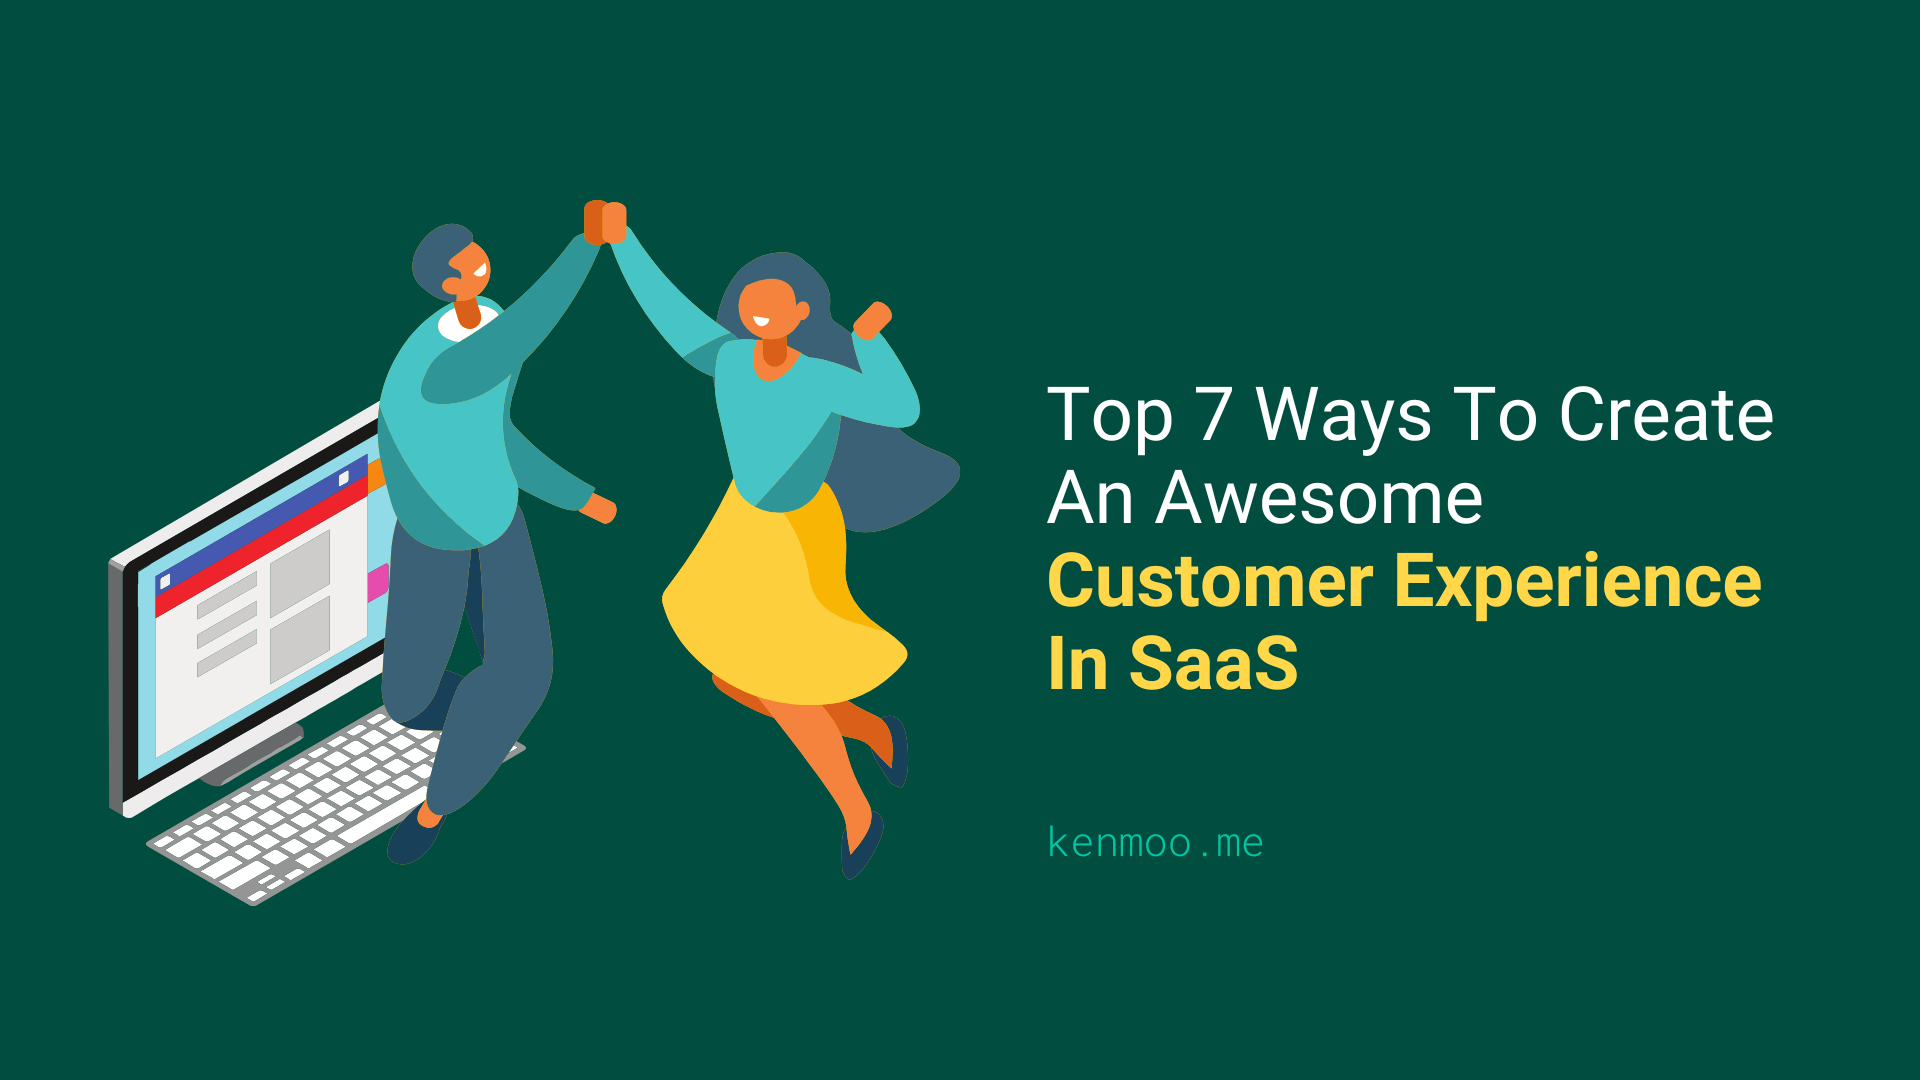 Top 7 Ways To Create An Awesome Customer Experience In SaaS